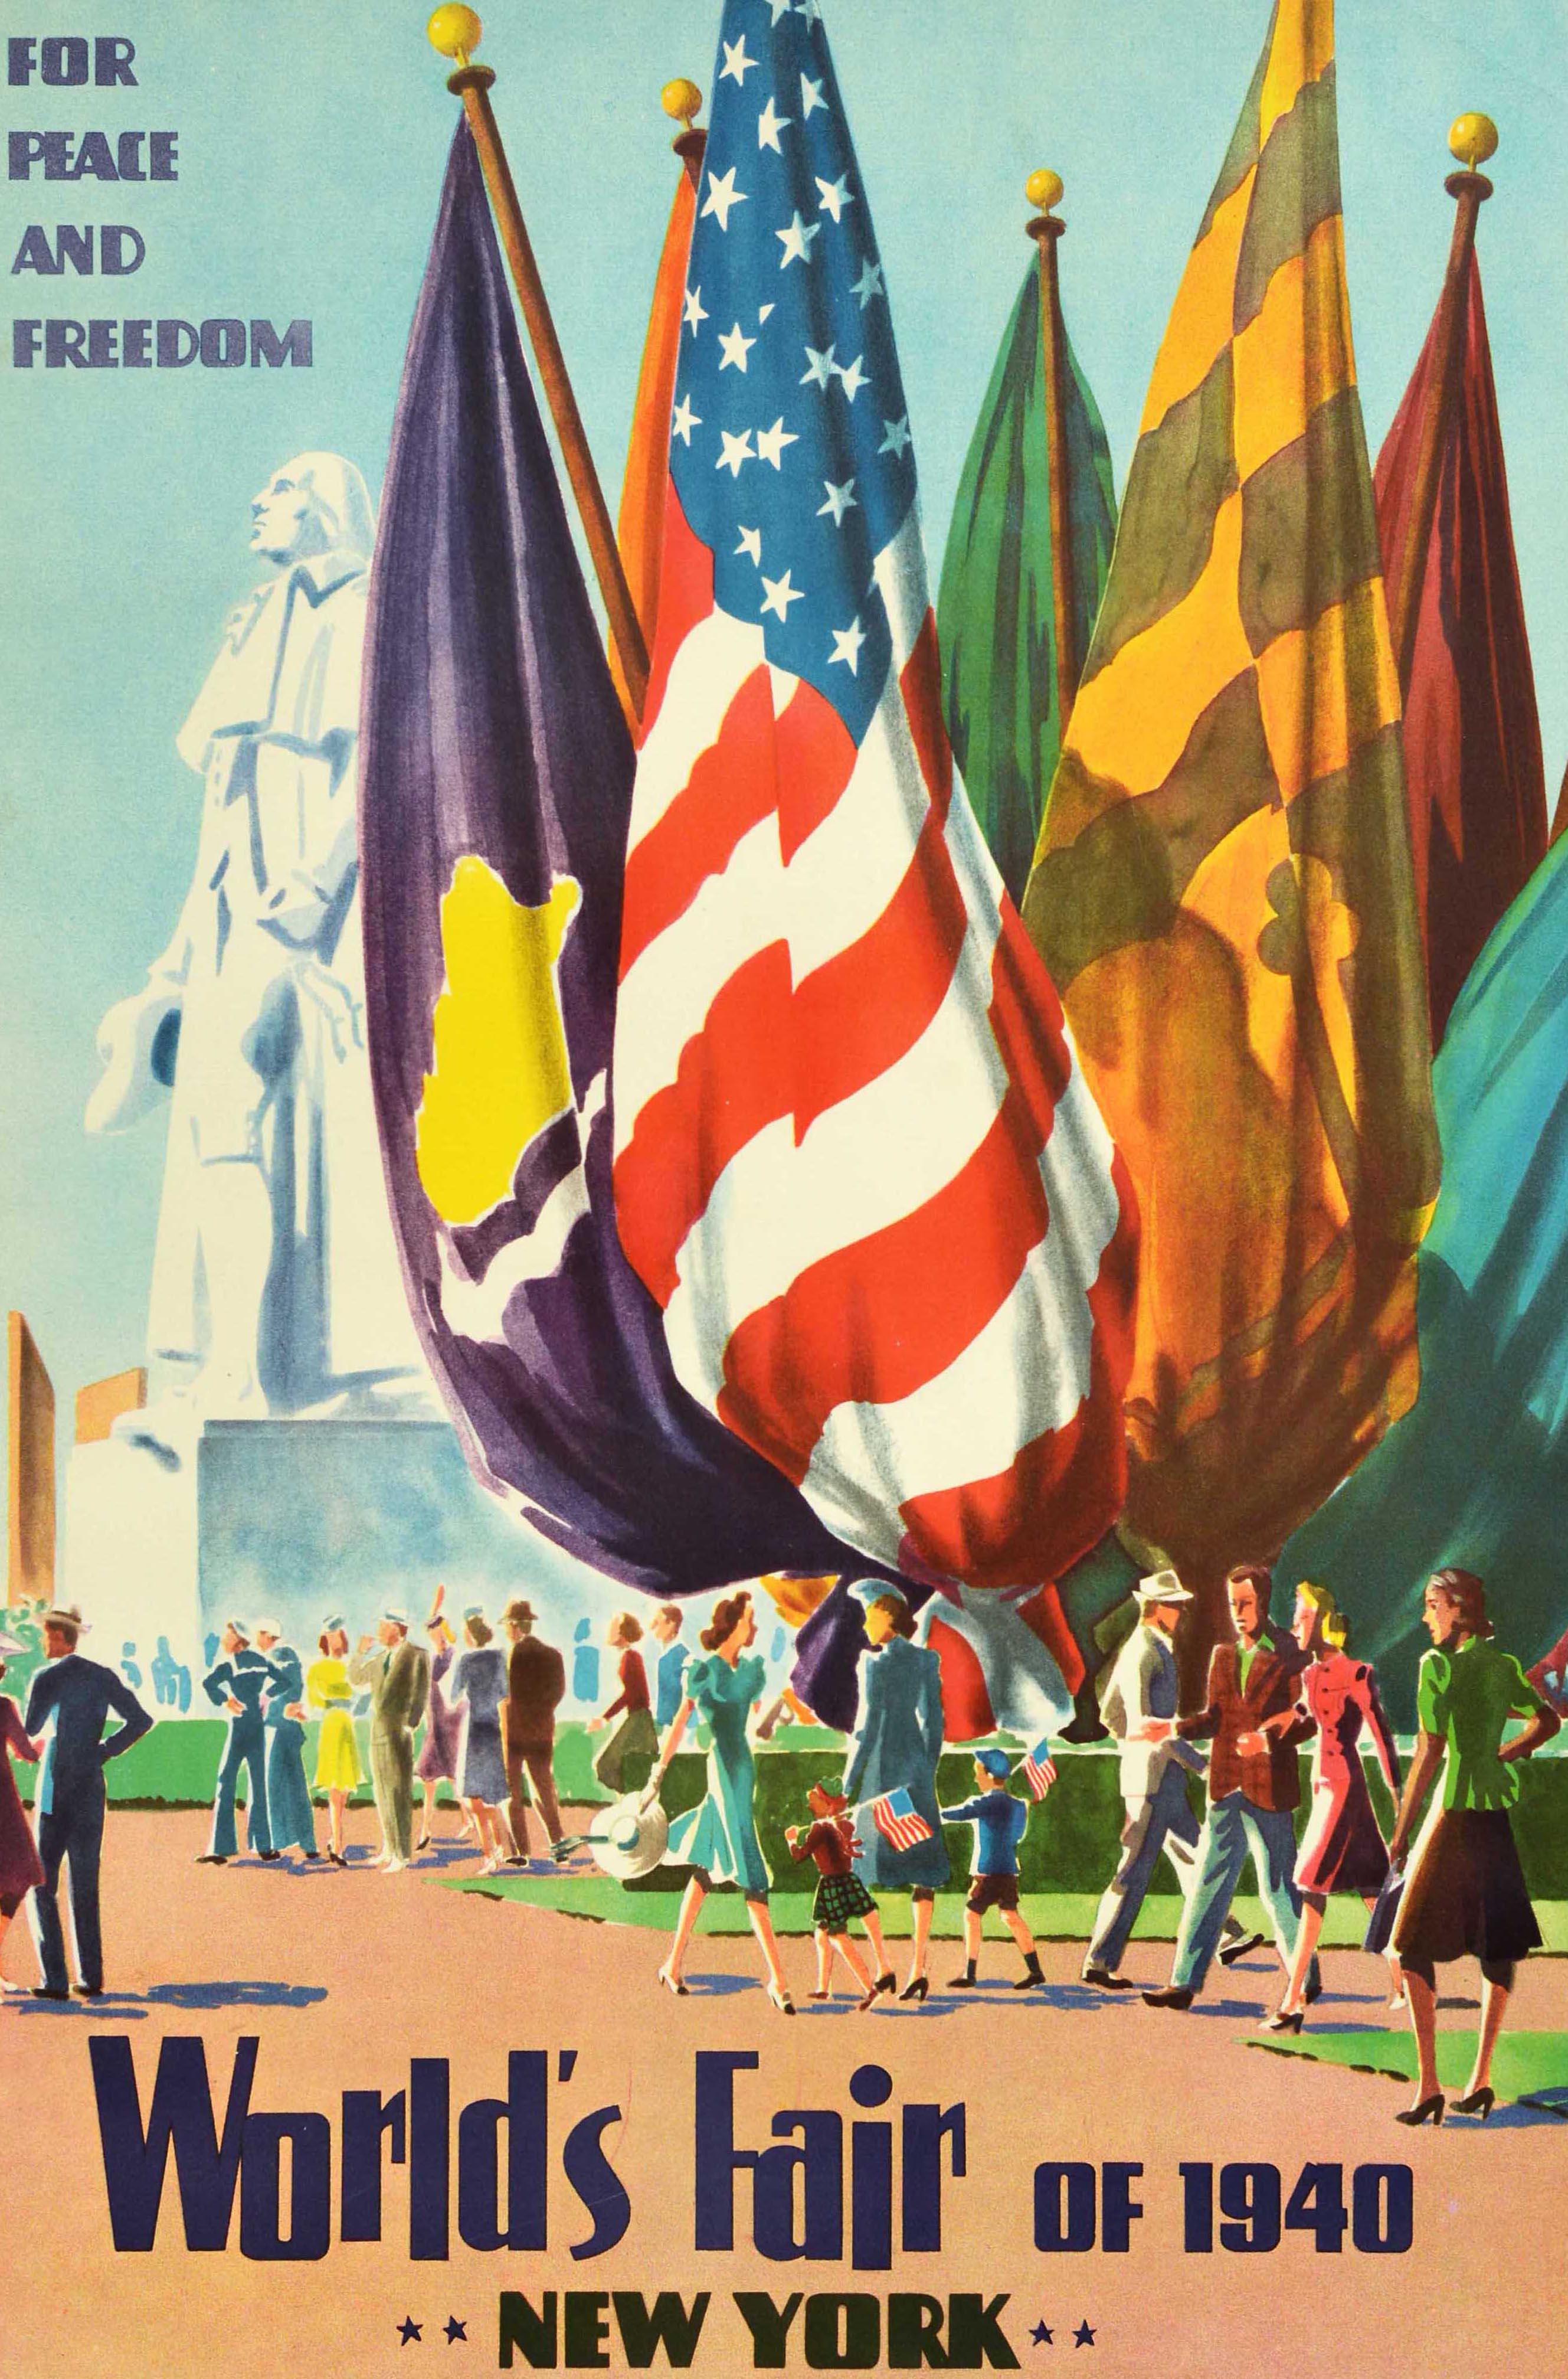 Original vintage travel advertising poster - World's Fair of 1940 New York For Peace and Freedom - featuring a colourful illustration of people walking by a display of flags with two children holding American flags and the statue of the founding